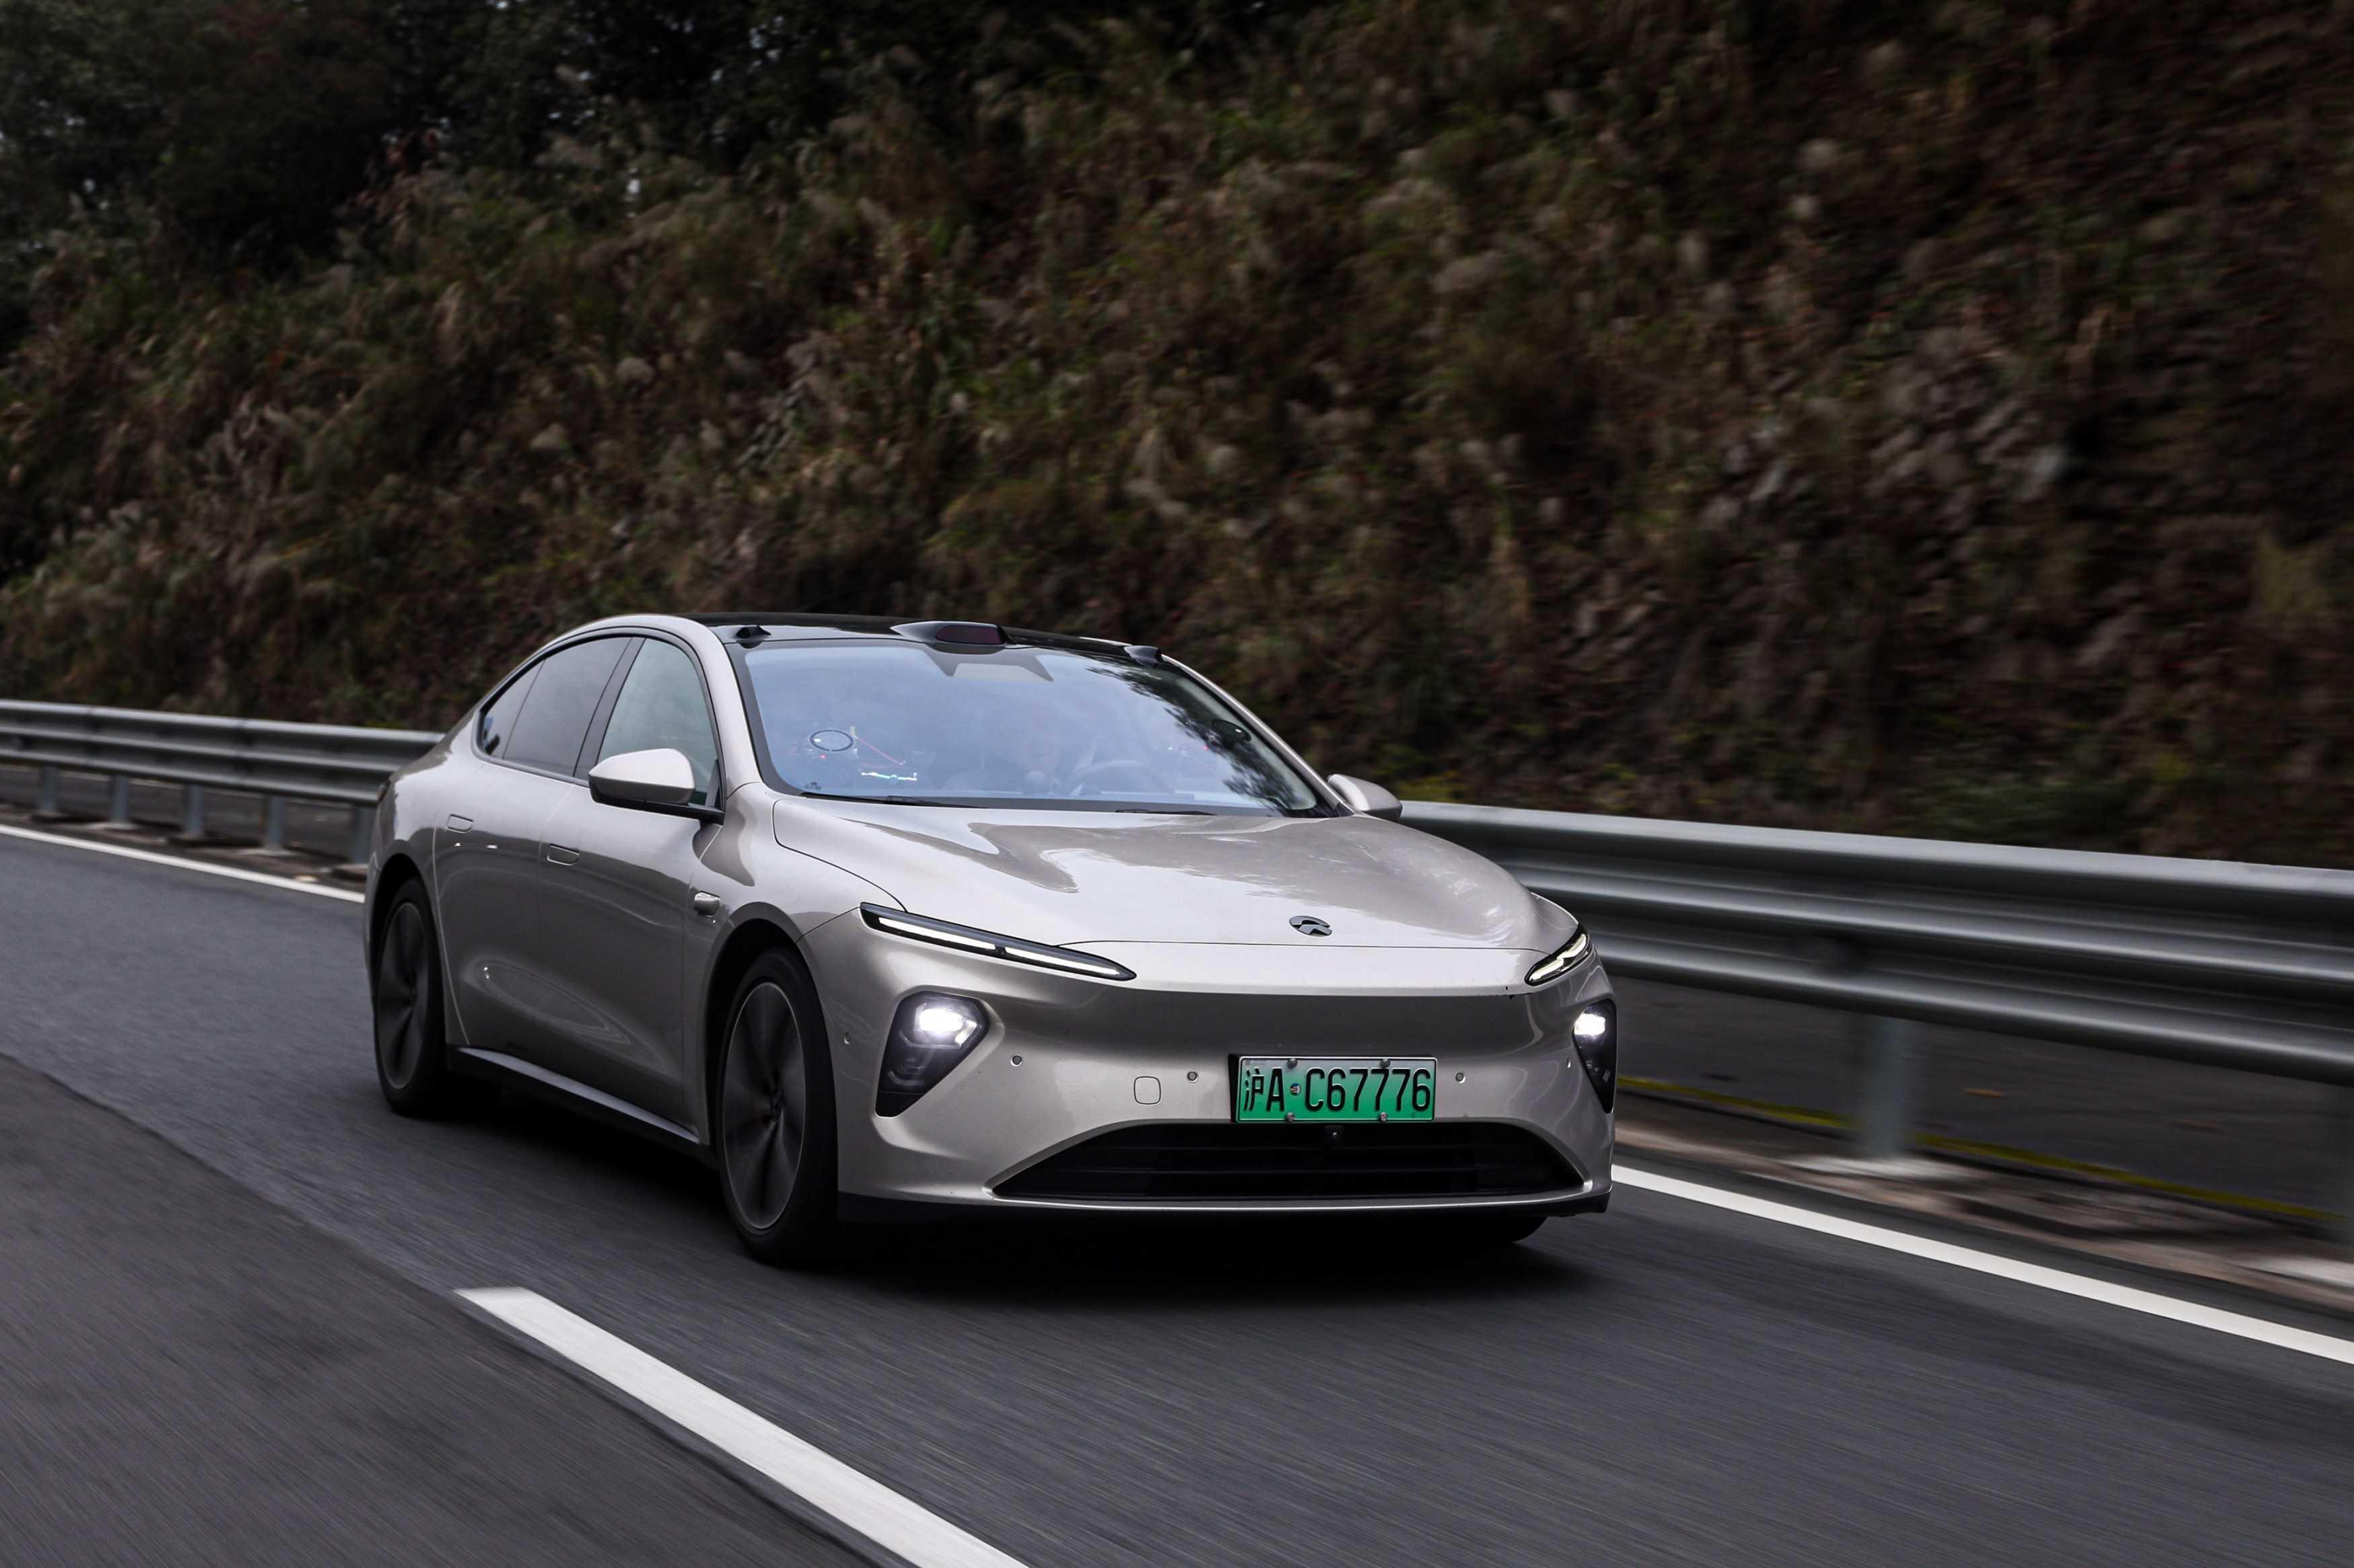 NIO showcases Ultra Long Range battery by completing 1000+km on a single charge